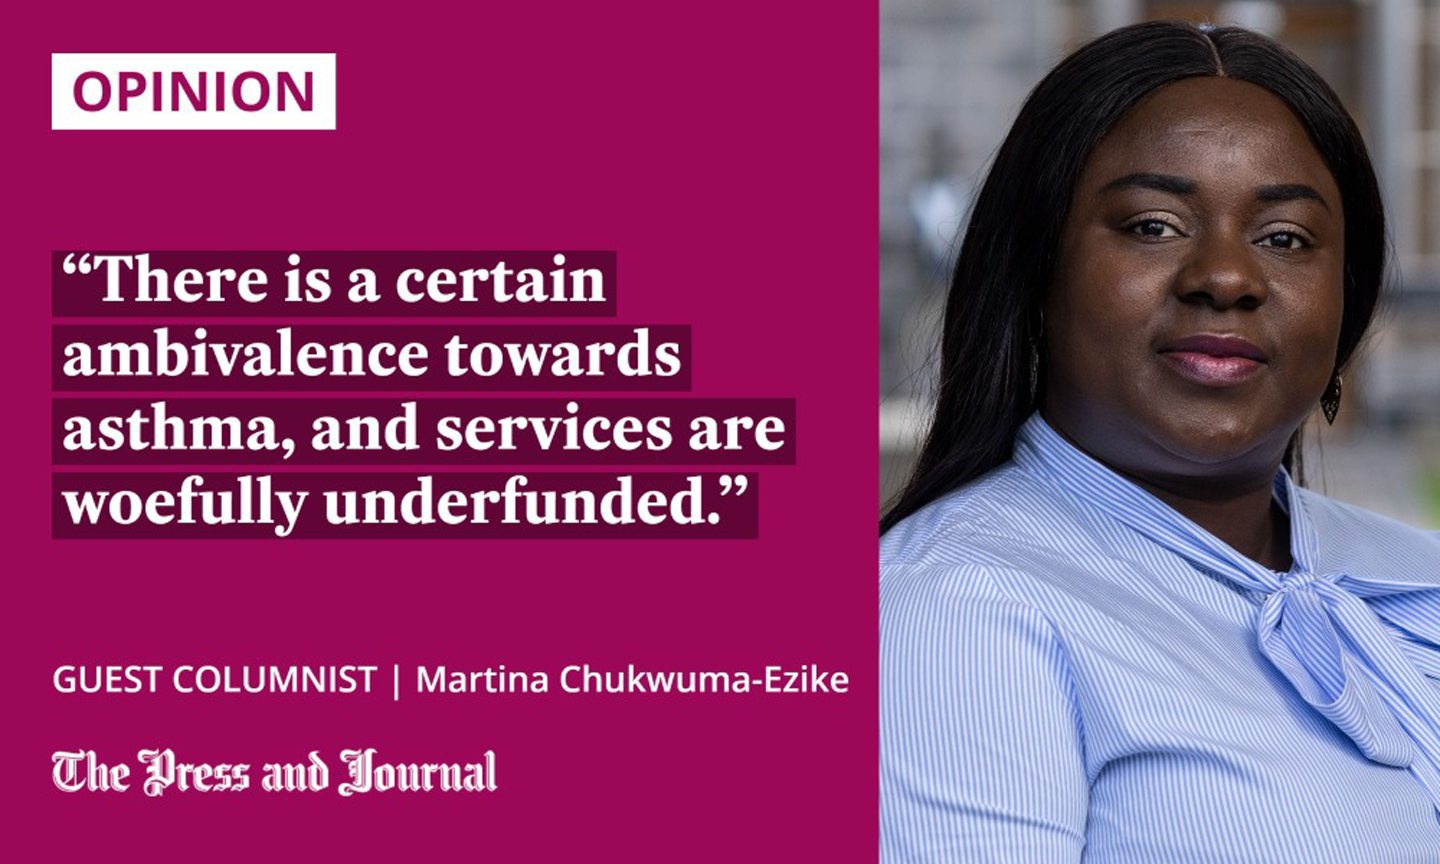 Quotation from guest columnist Martina Chukwuma-Ezike on World Asthma Day 2023: "There is a certain ambivalence towards asthma, and services are woefully underfunded."